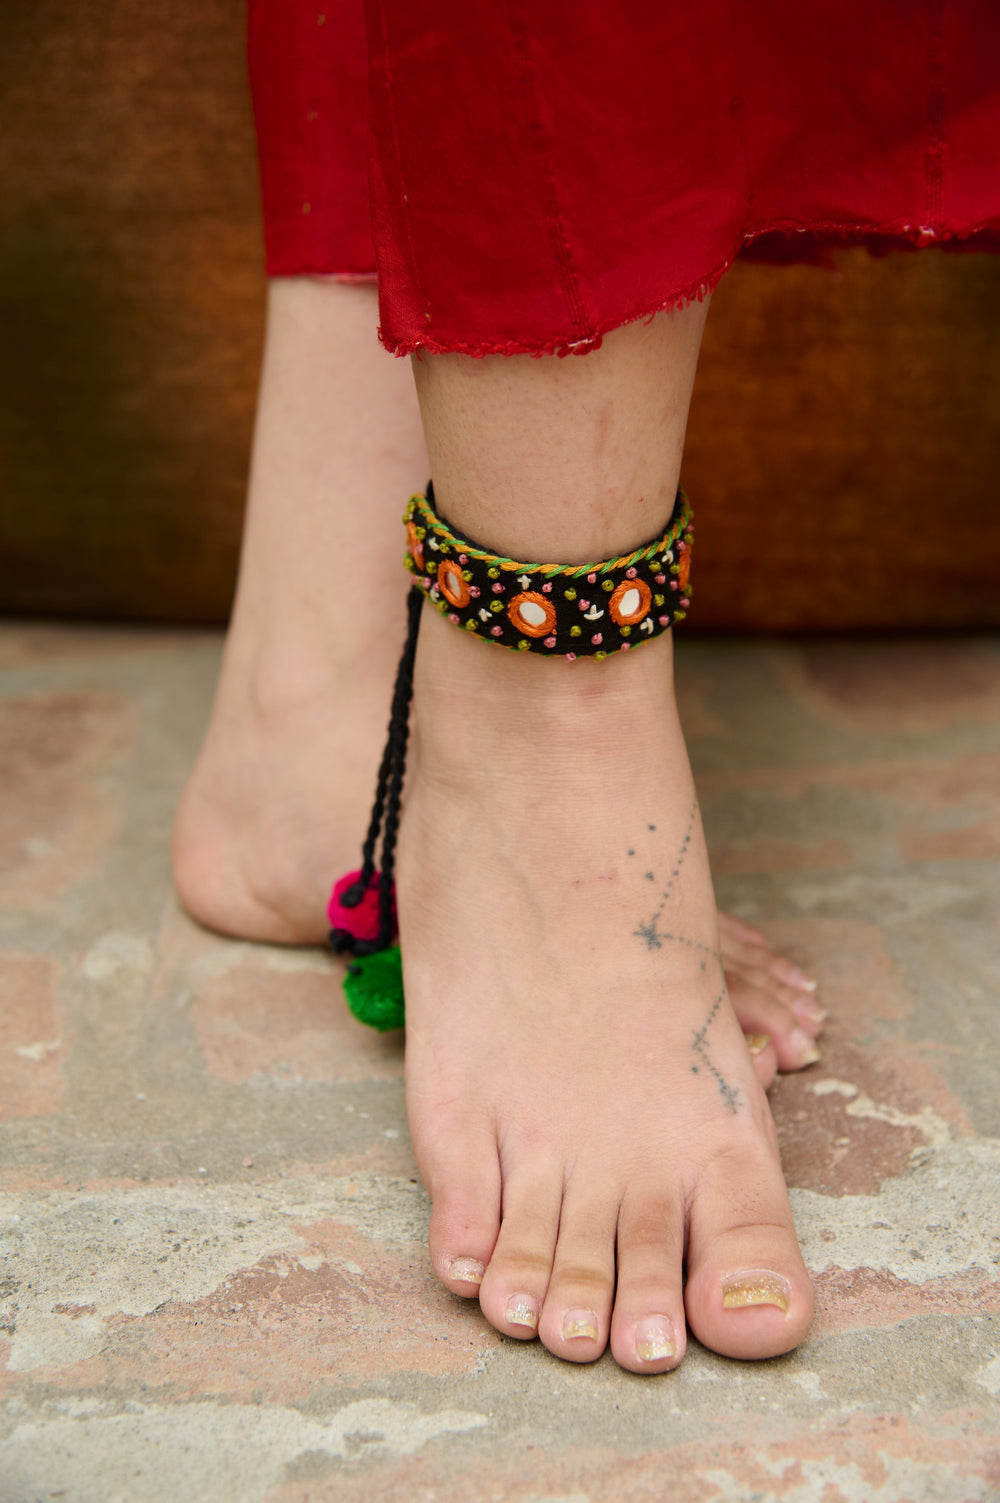 Inateannal Boho Layered Turquoise Ankle Silver Tassel Barefoot Sandals Bracelet  Toe Ring Foot Anklet Summer Beach Anklet Bracelet Anklet Jewellery for  Women and Girls : Amazon.com.au: Clothing, Shoes & Accessories